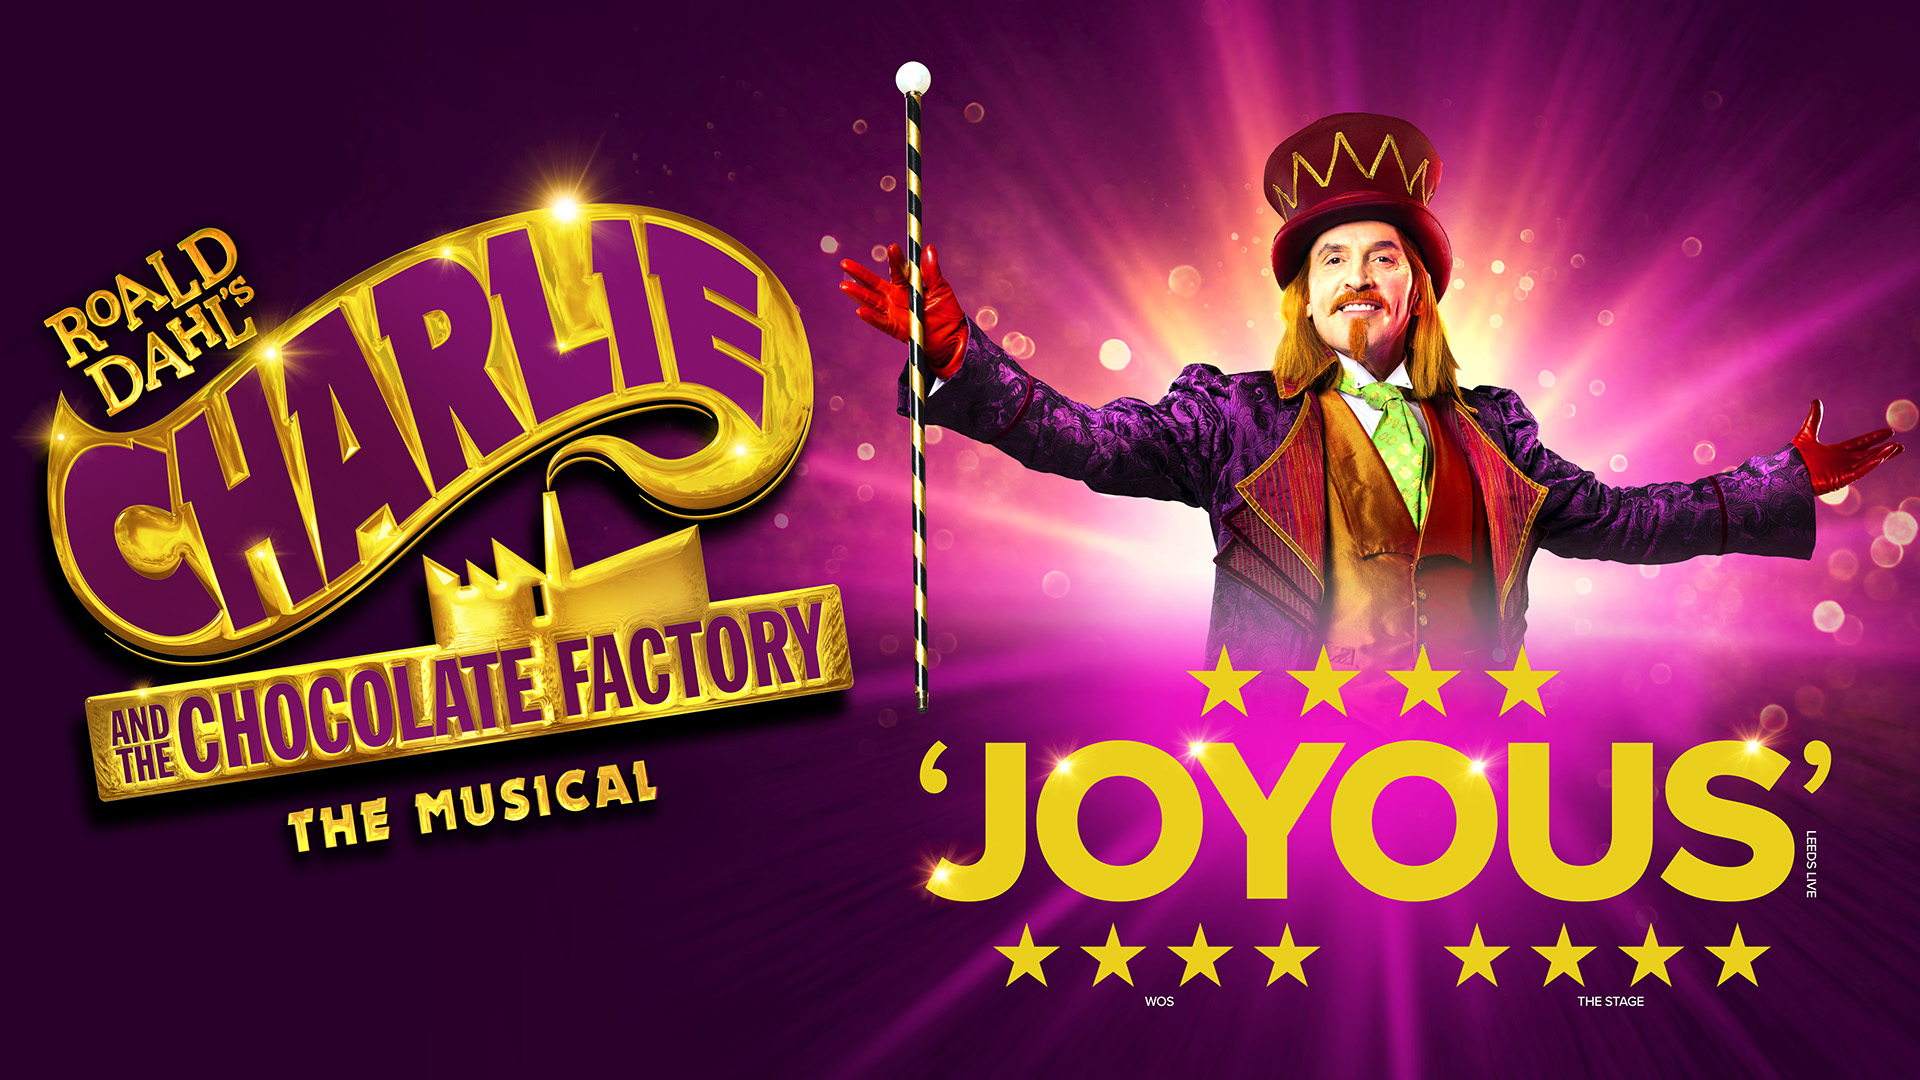 REVIEW Roald Dahl’s Charlie and the Chocolate Factory The Musical